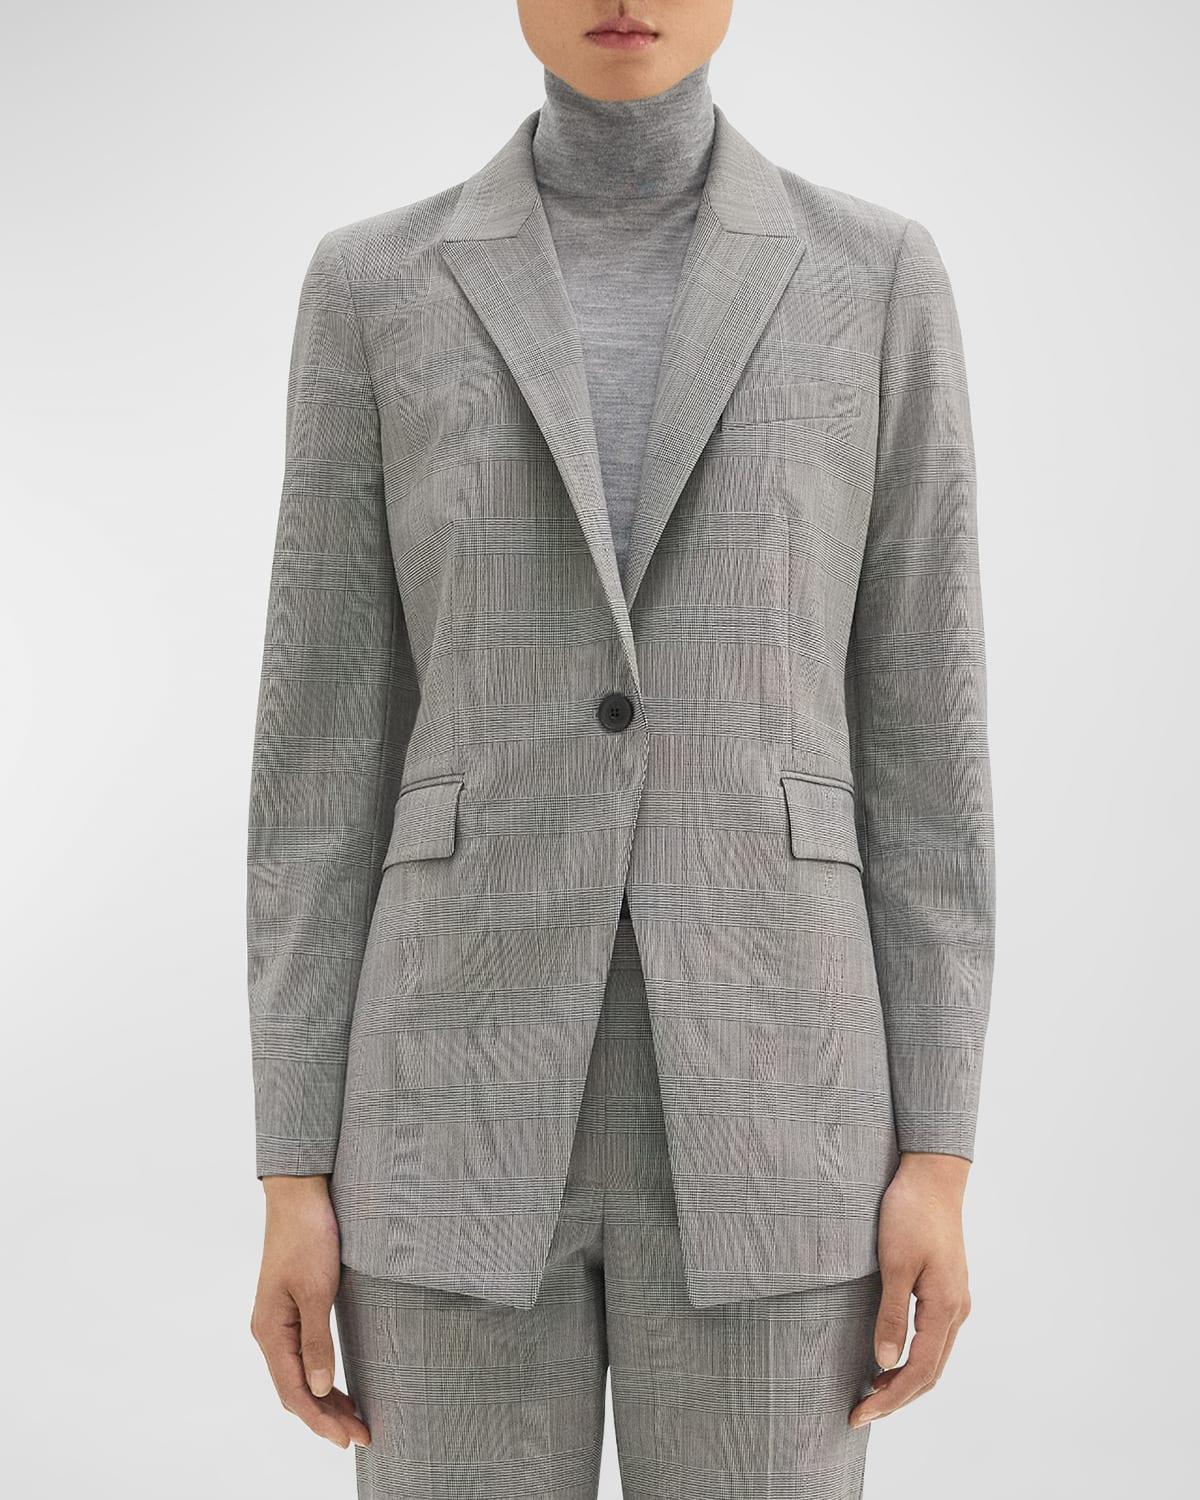 Theory Etiennette Nipped waist Wool Plaid Suiting Blazer in Gray